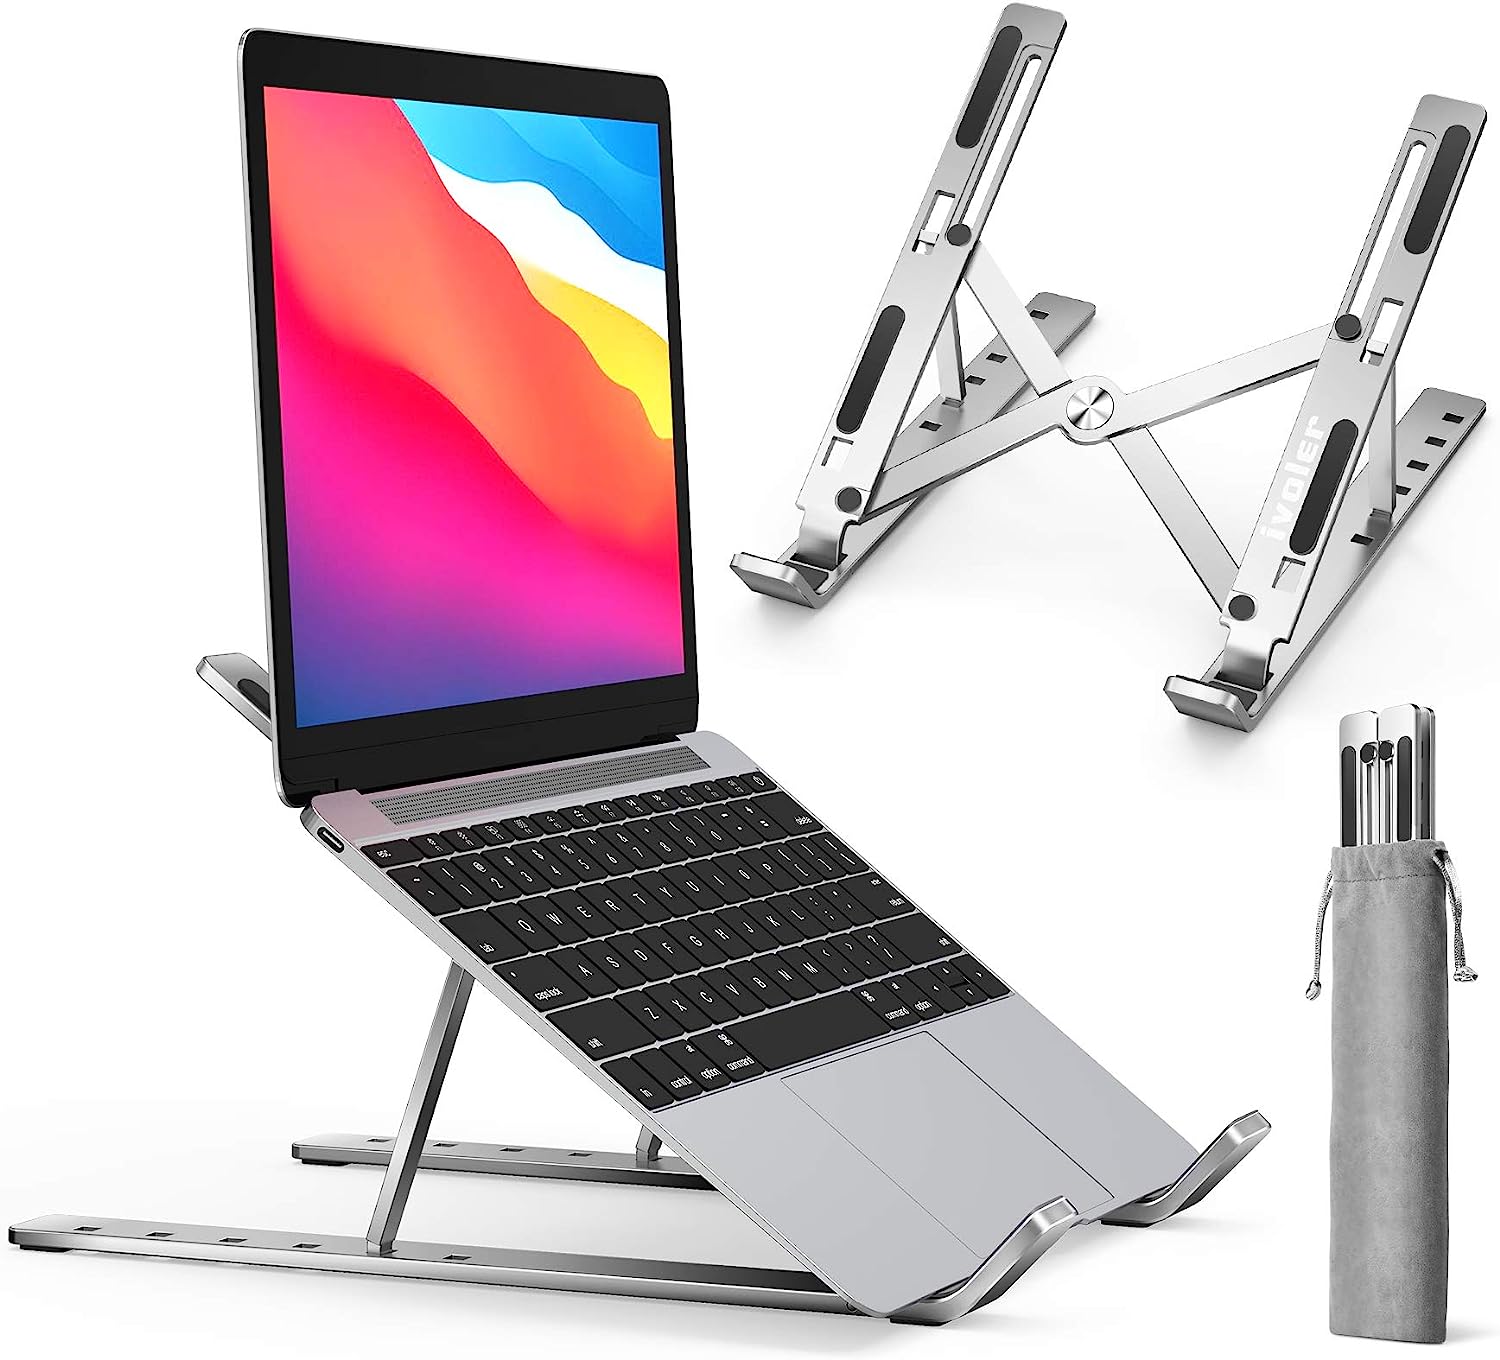 Actor Insider | Laptop Stand